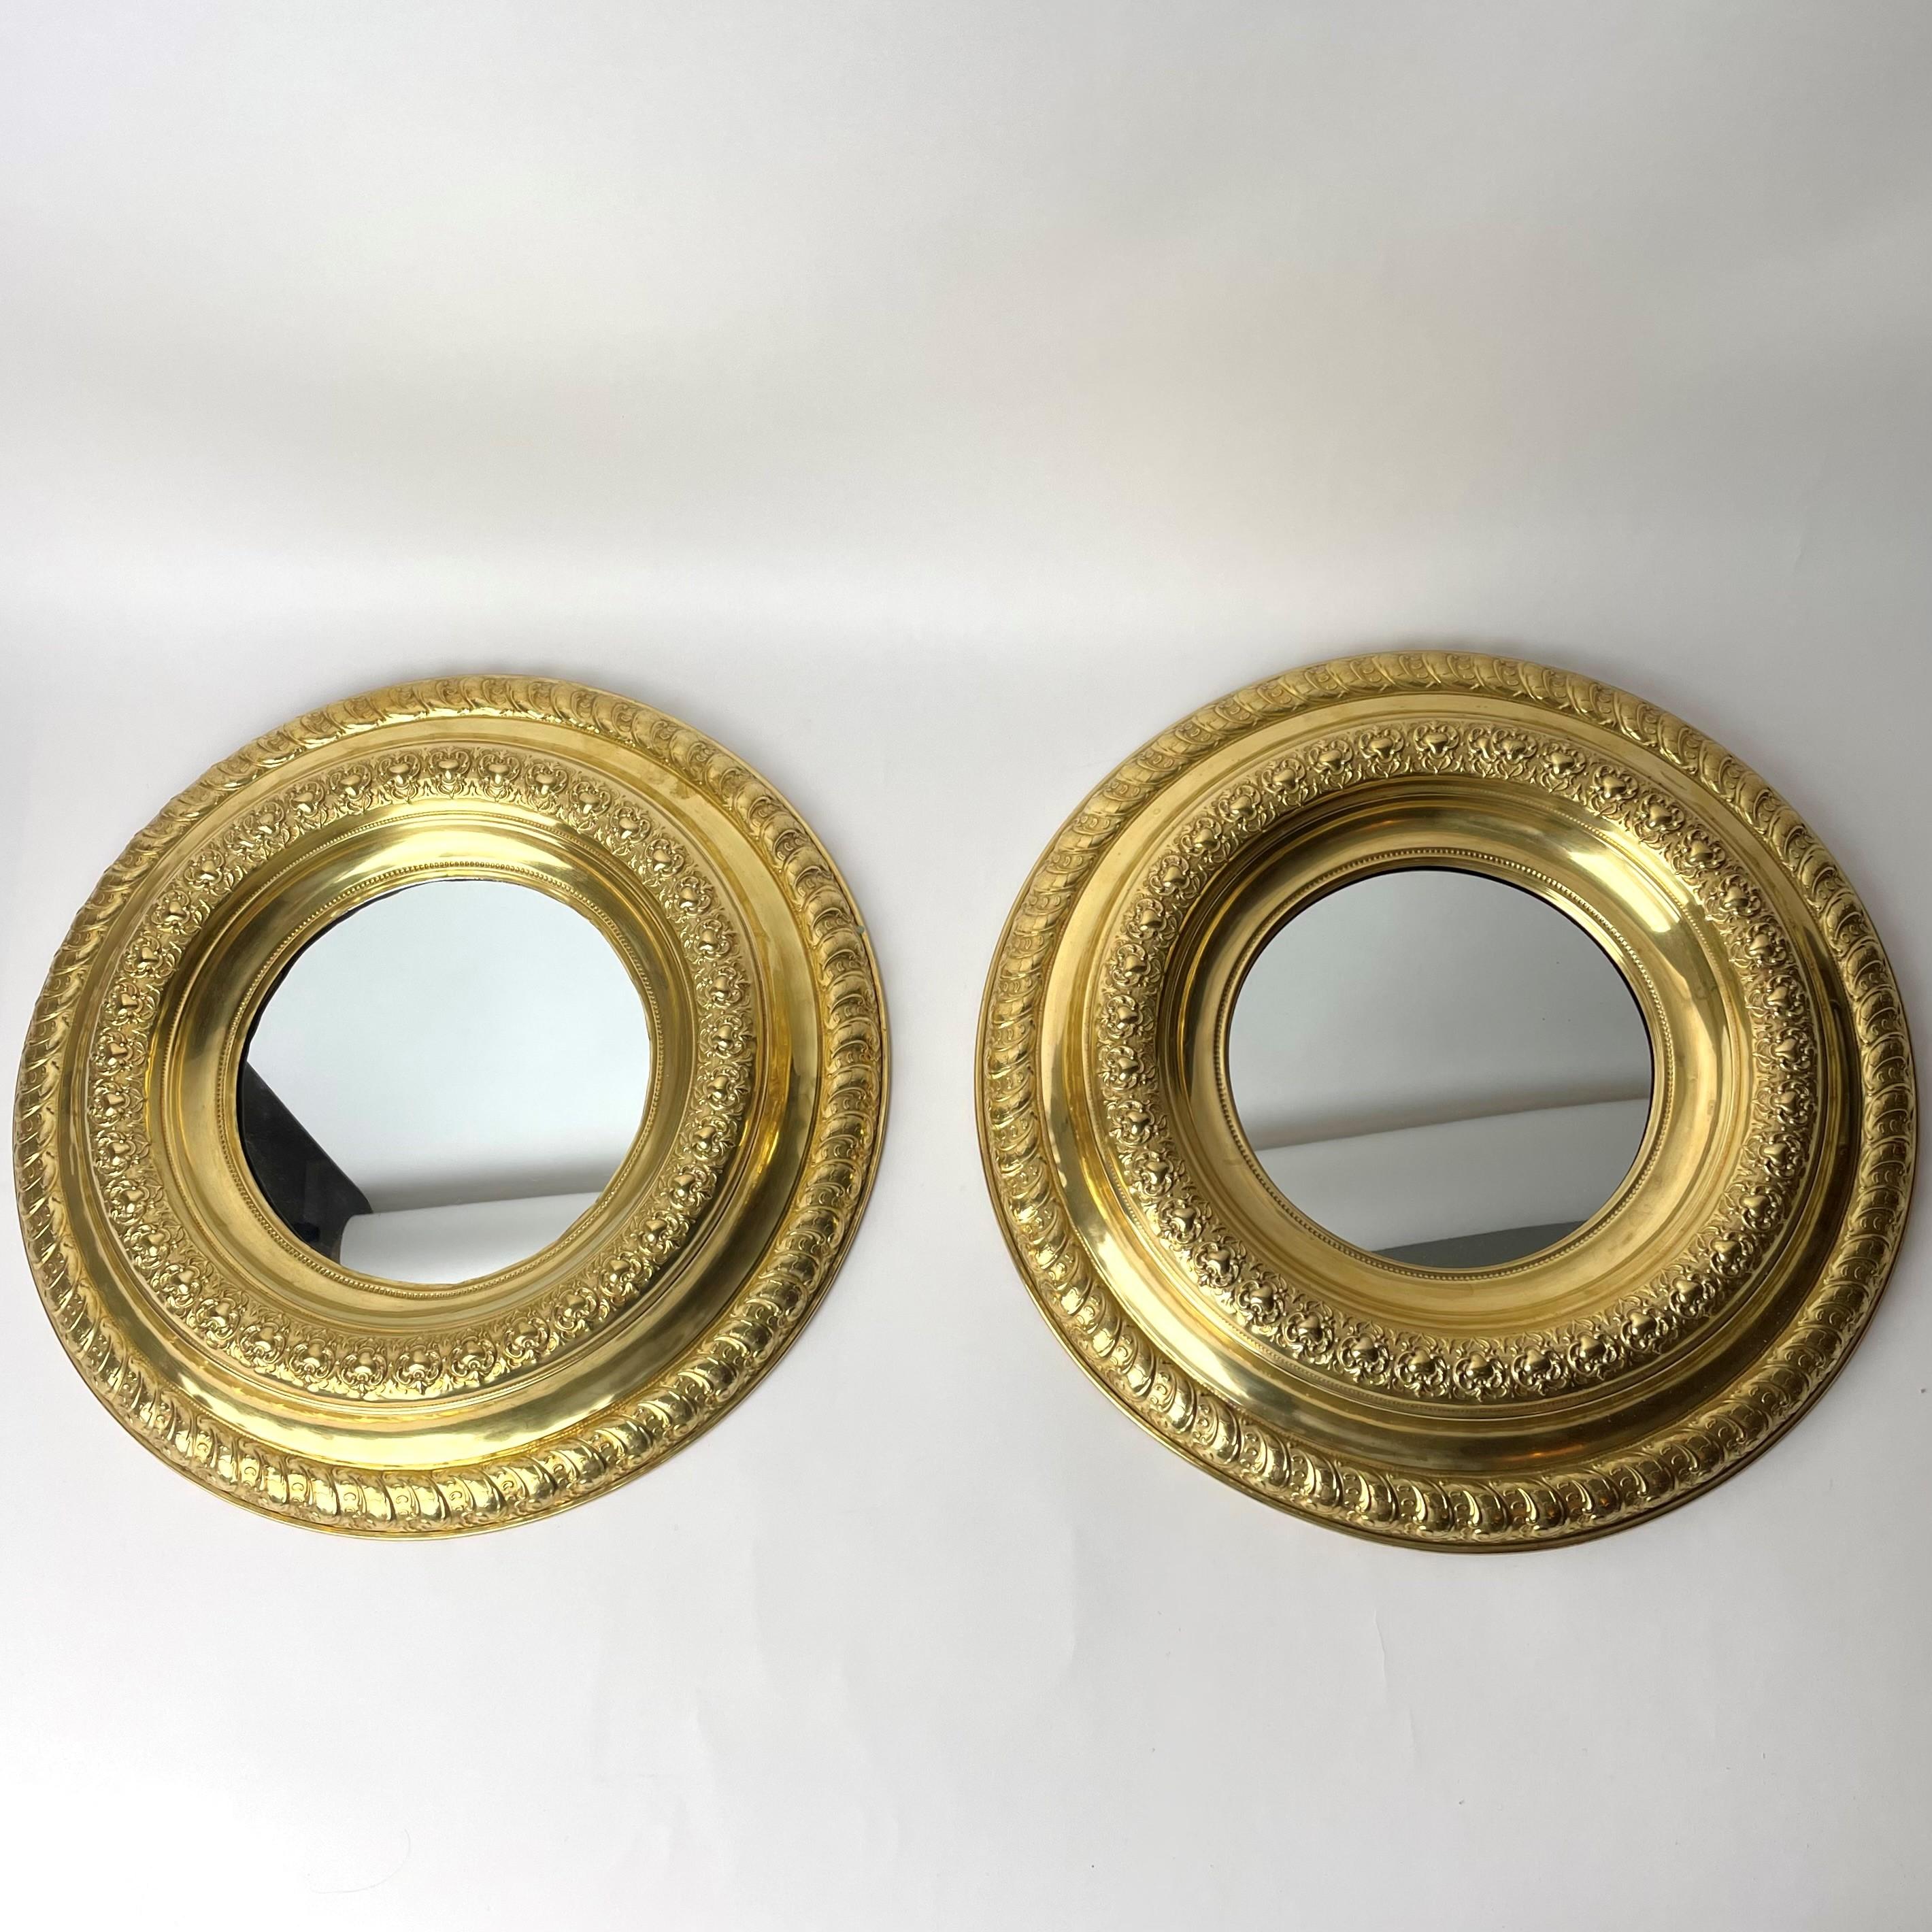 A pair of fancy Wall Mirrors made of brass, from late 19th century. Beautifully decorated brass detailing, depicting floral and geometrical patterning in repoussé and chasing.

Wear consistent with age and use.